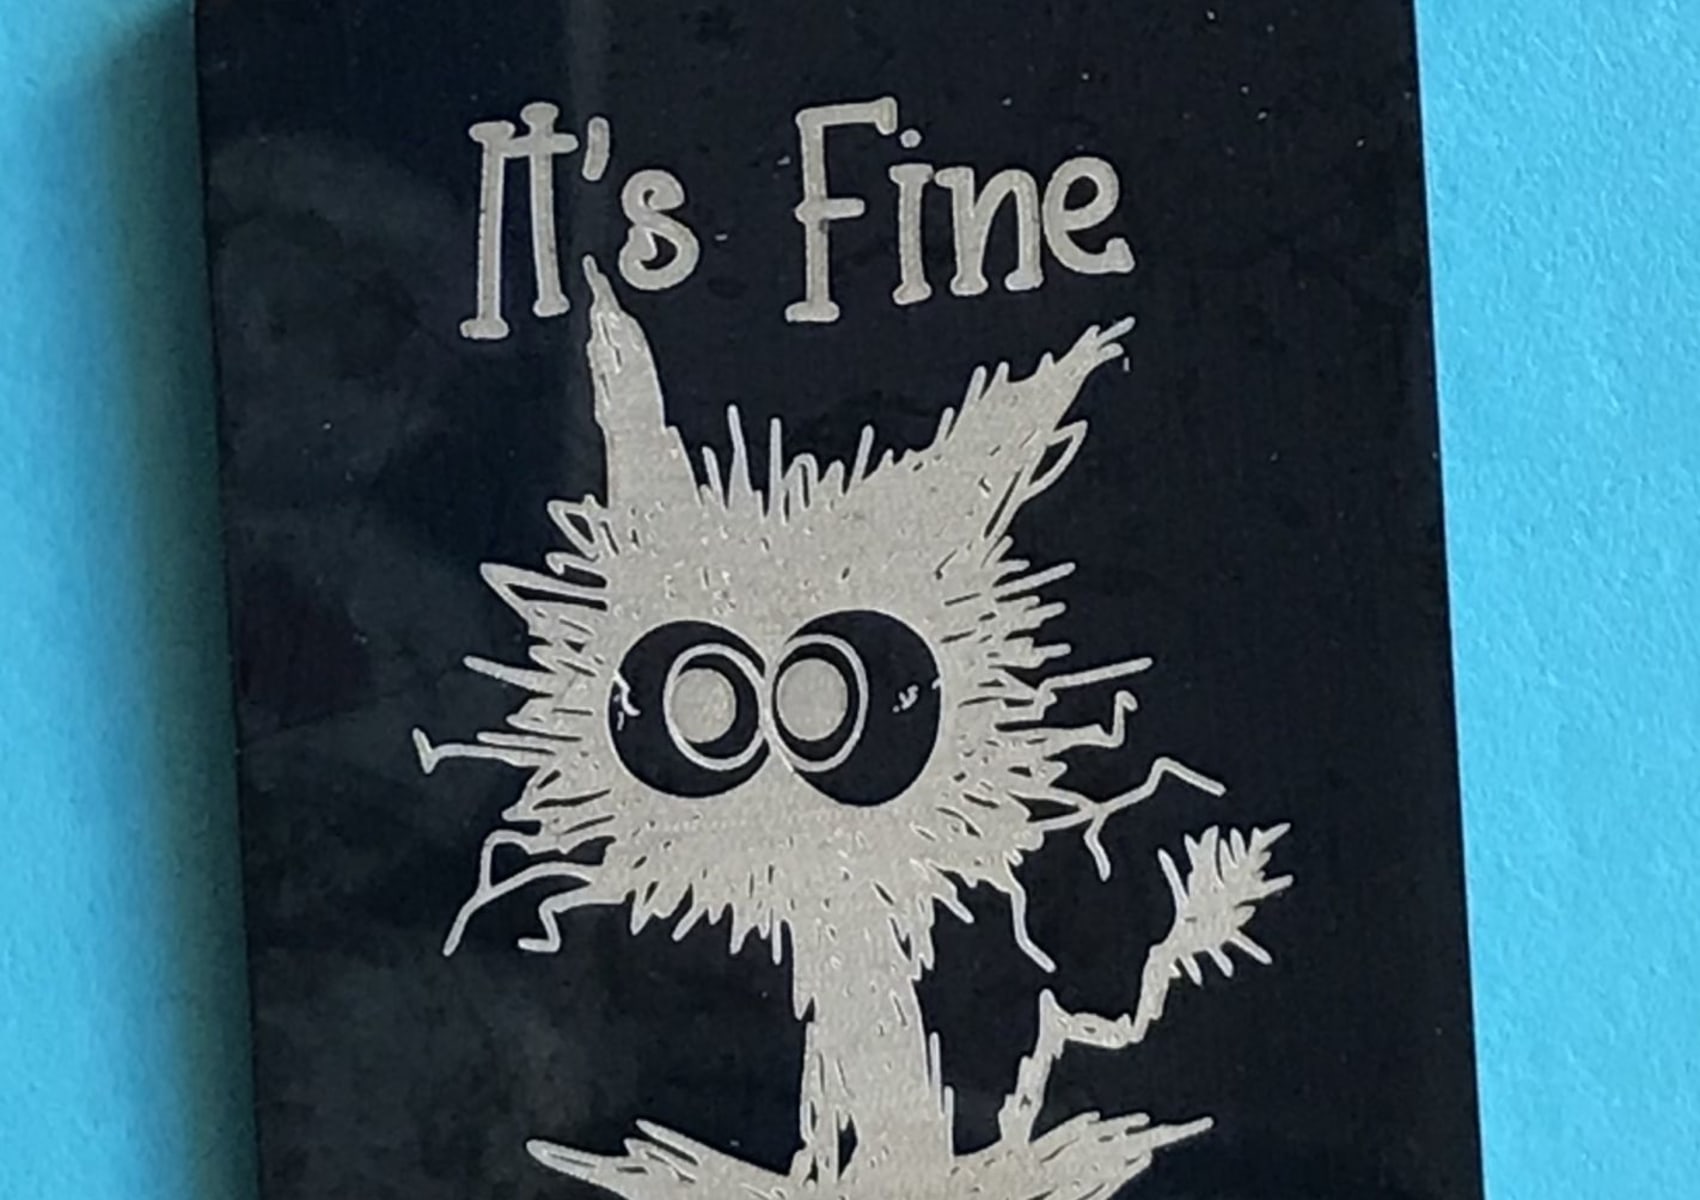 Im Fine everything is fine oblong keyring for sale at Yorkshire Cat Rescue